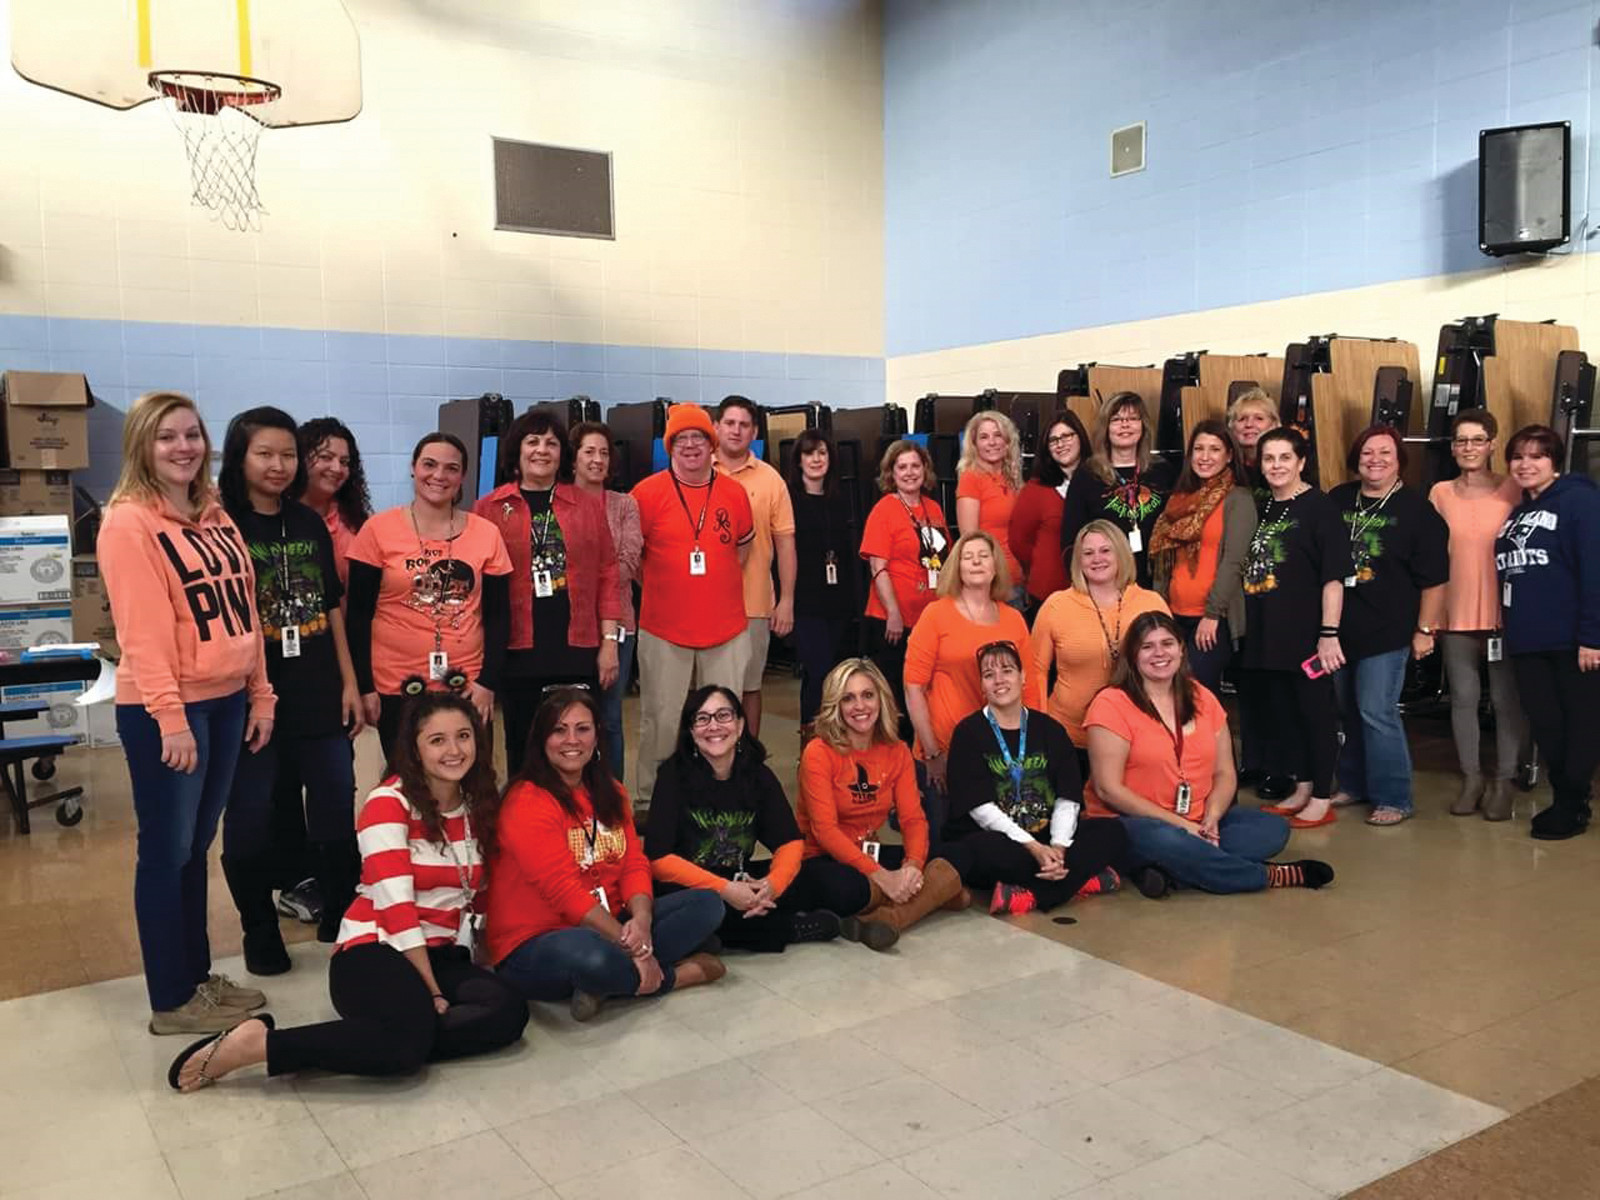 PART OF THE SOLUTION: The staff at Edgewood Highland Elementary School show off their bold orange colors on Oct. 30 as part of their efforts to raise awareness about childhood hunger in America and in the city of Cranston.